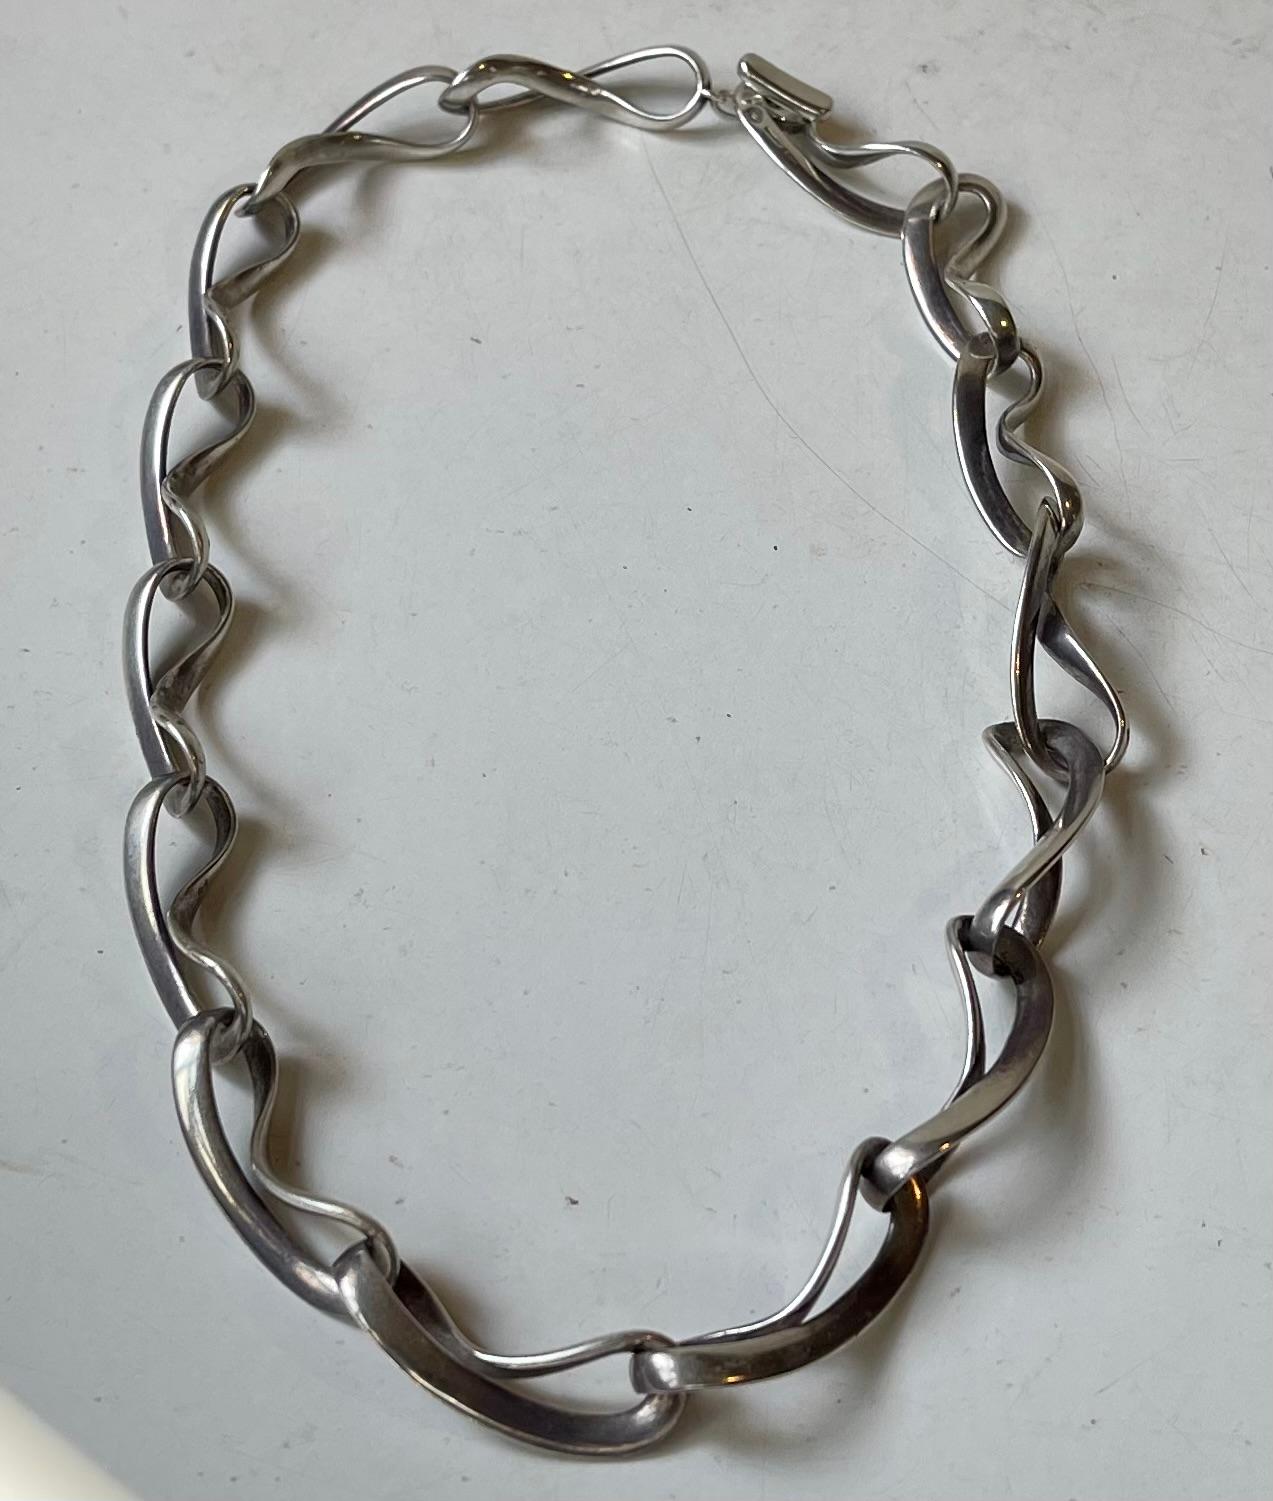 Georg Jensen Sterling Silver Necklace number 452. It is called INFINITY and was designed by Regitze Overgaard in 2004. This particular piece in from this first series. It consists of 15 Links shaped as the number 8 that symbolizes infinity.